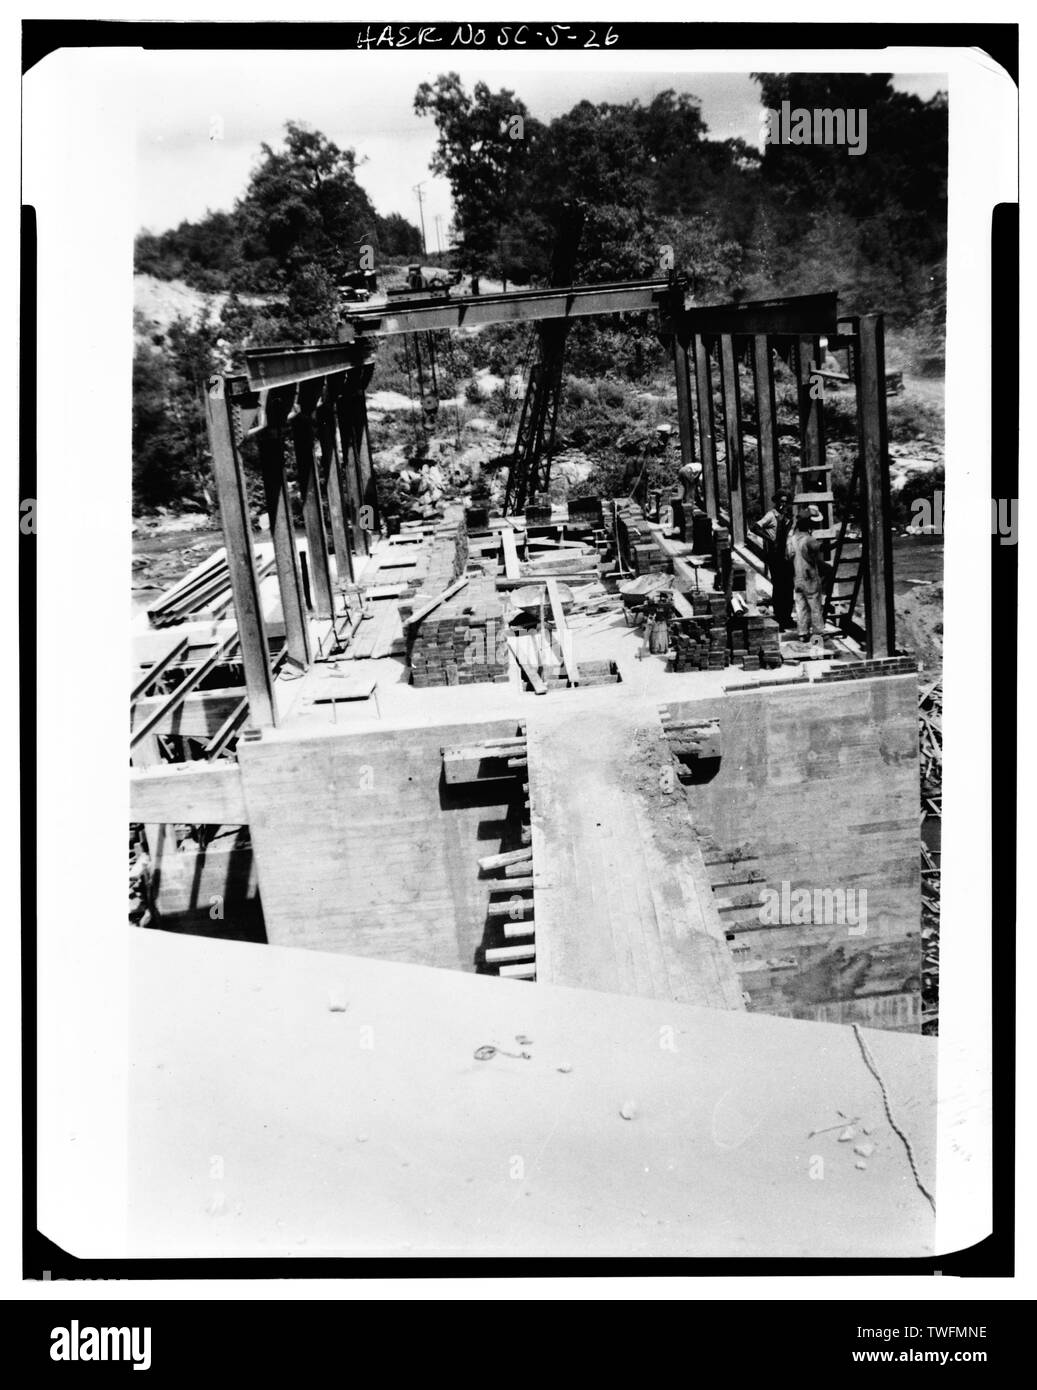 POWER PLANT, FIRST FLOOR - Abbeville Hydroelectric Power Plant, State Highway 284 and County Road 72, Rocky River (historical), Abbeville County, SC; Abbeville Water and Electric Plant Company; Pennell, James Roy; White, W H; Abbeville Power Company Incorporated; D.M. Rickenbacker Construction Company; Townsend, C P; Wideman and Singleton; Britton, John B; S. Morgan Smith Company; Woodward Governor Company; Bethlehem Steel Company; Westinghouse Corporation; Bush Sulzer Brothers Company; Mark Brothers; Cary, Brian, transmitter Stock Photo